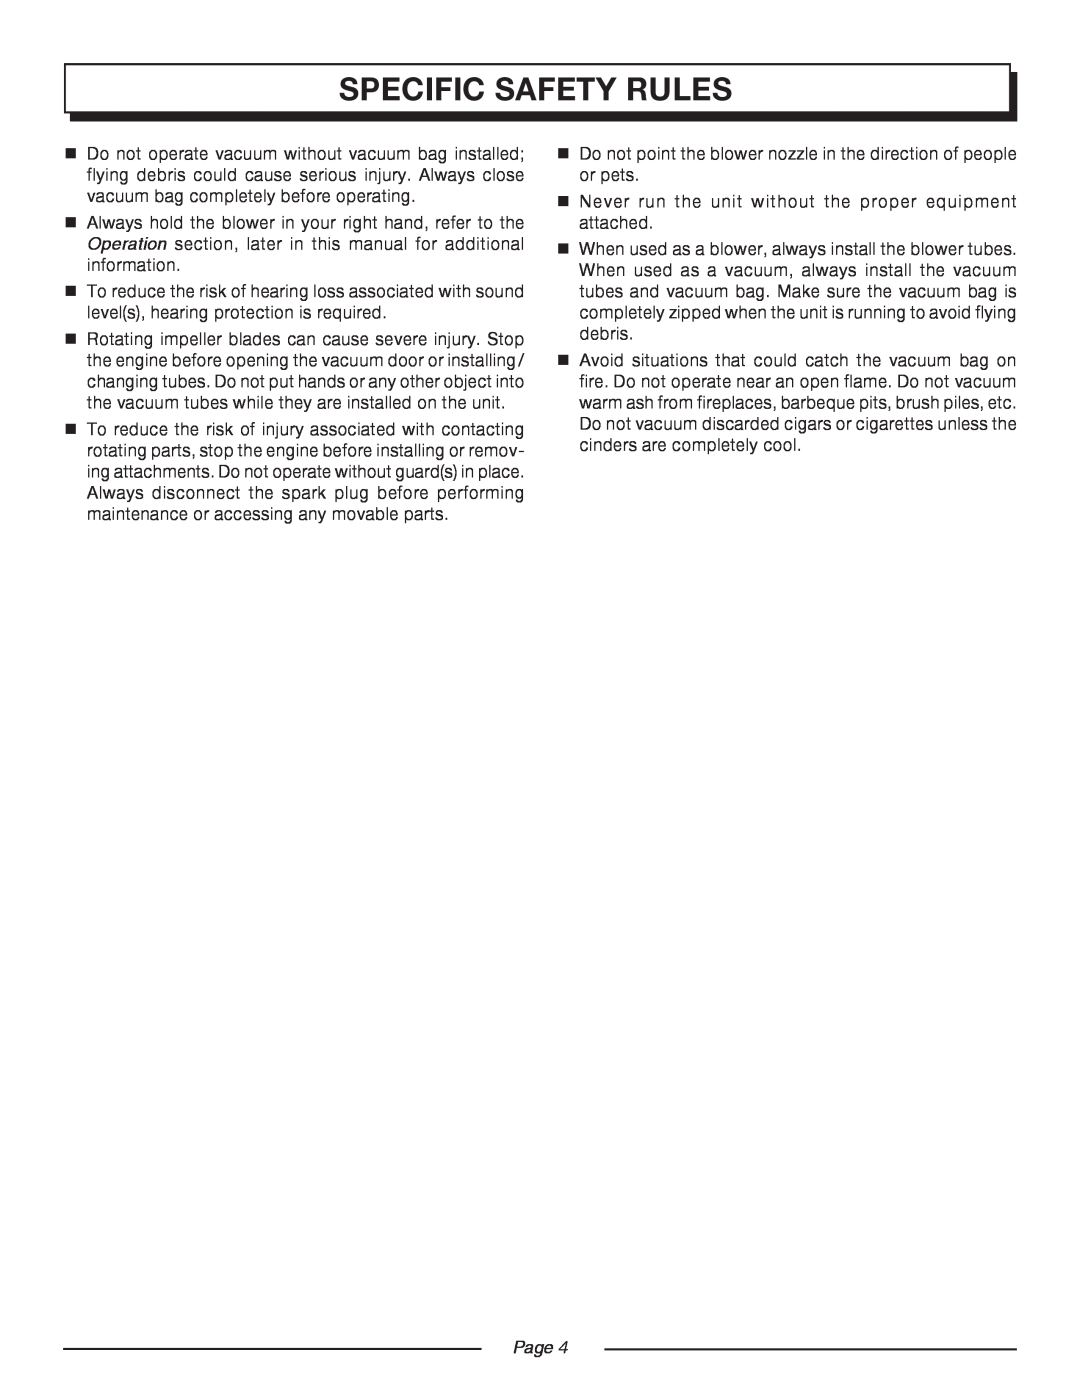 Homelite UT08947 manual Specific Safety Rules, Page 